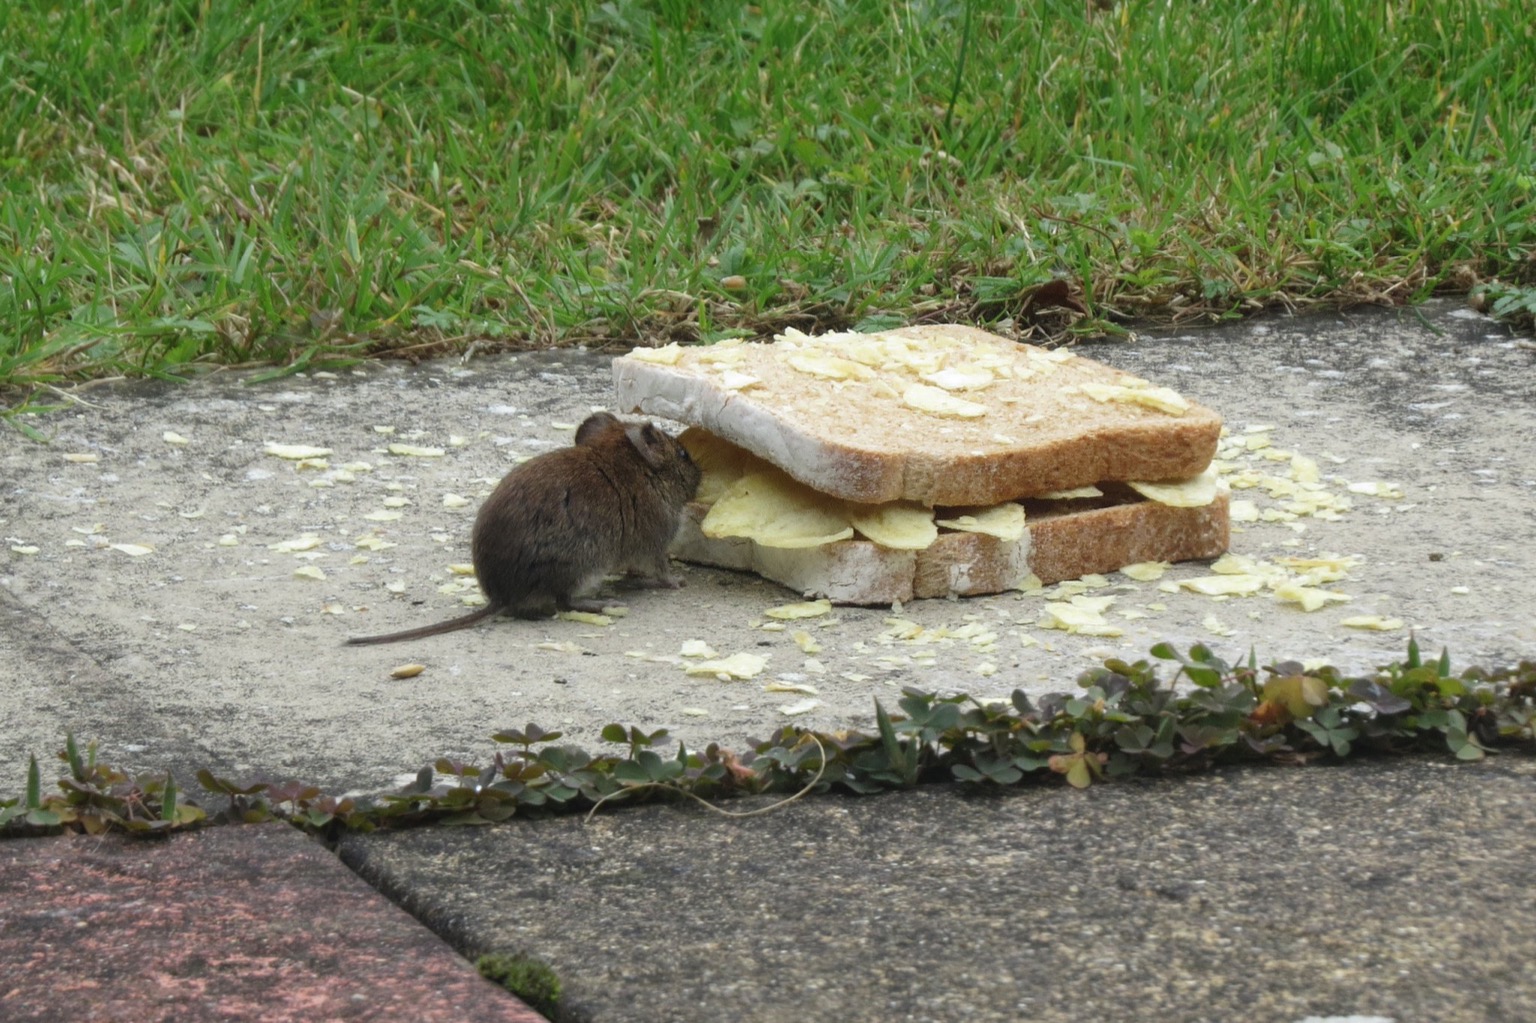 Mouse nibbling at brown crisp sandwich outdoors